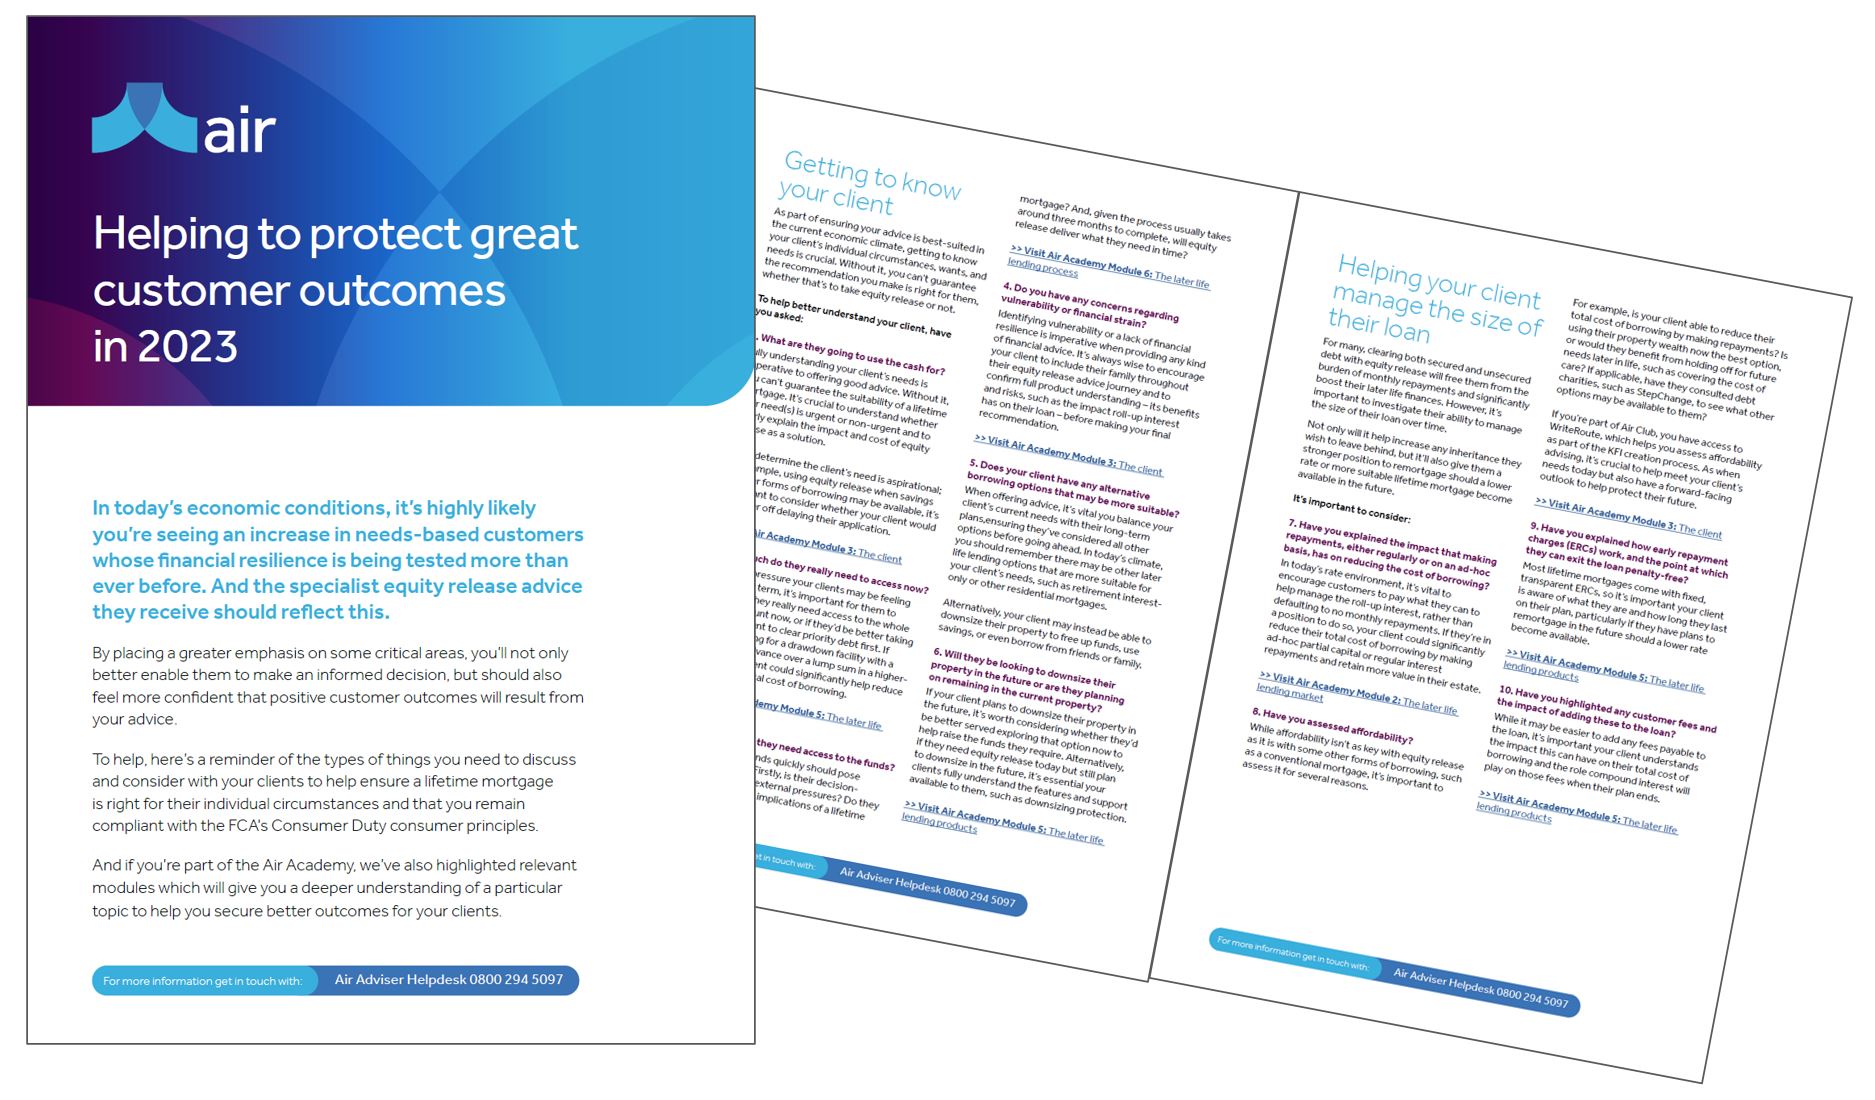 Read our short guide: Helping to protect great customer outcomes in 2023